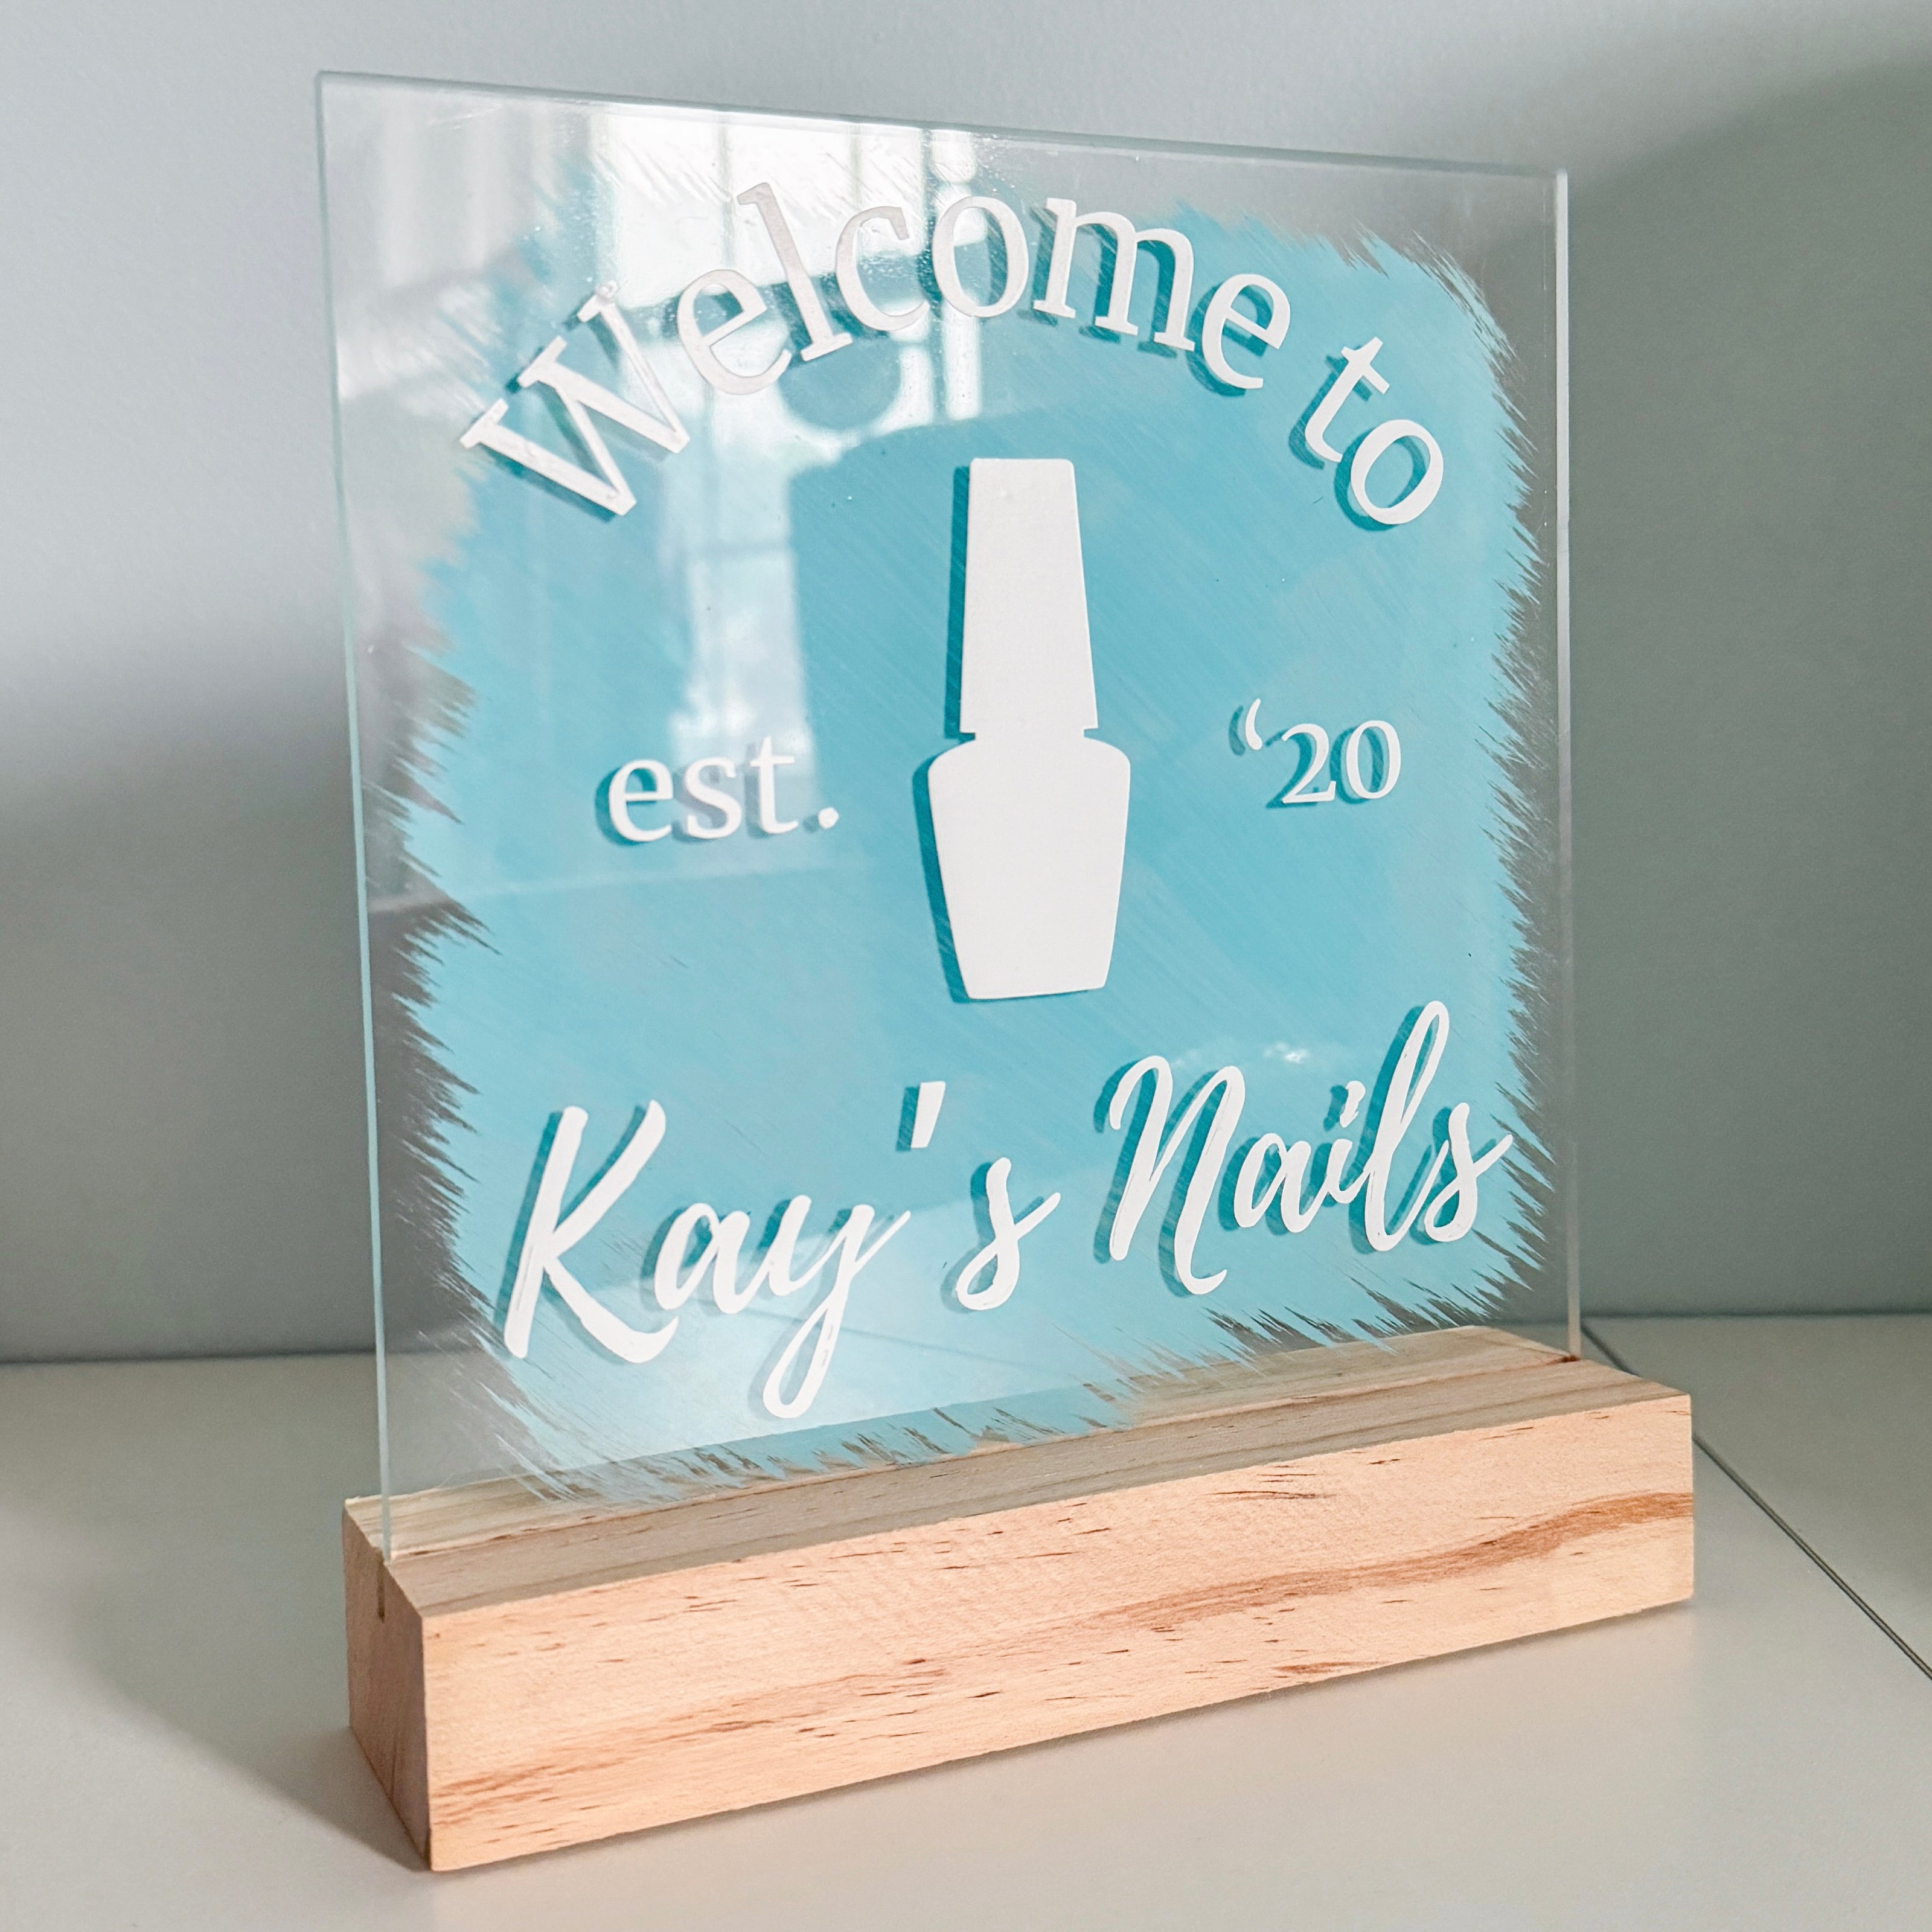 An acrylic sign with a nail salon logo in white with a blue paint background